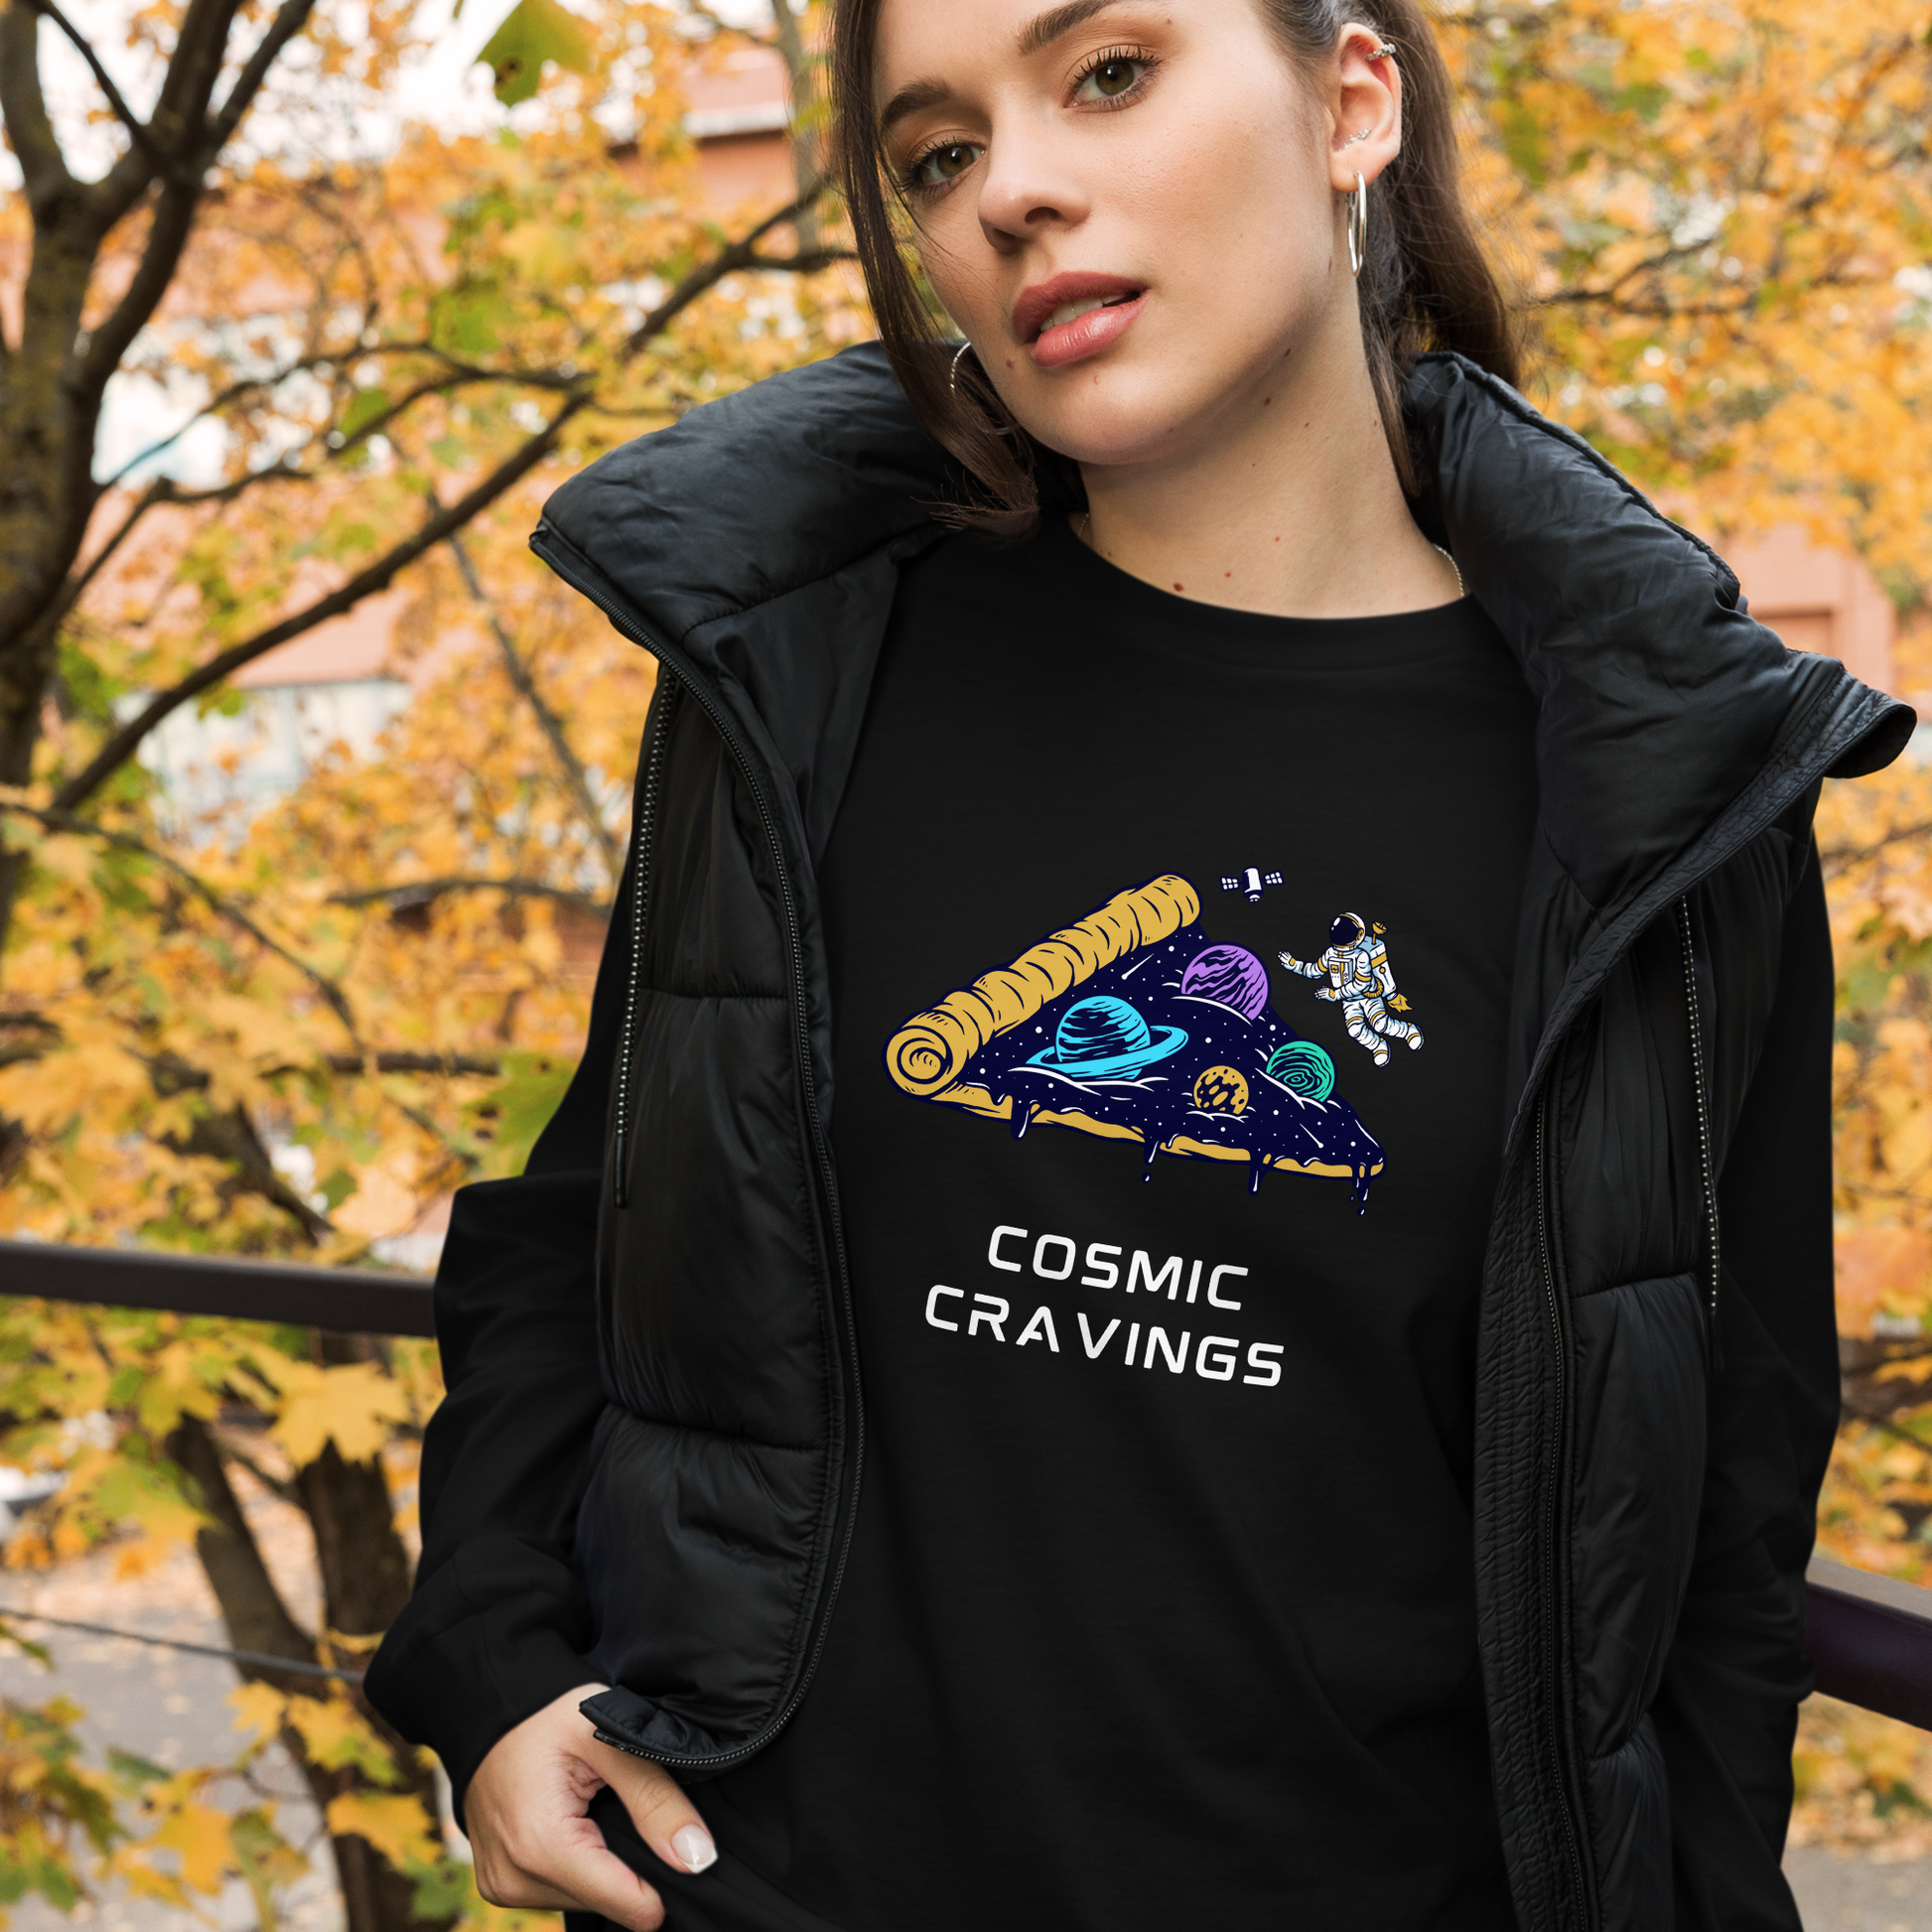 Woman wearing a Black Cosmic Cravings Long Sleeve Tee featuring an Astronaut Exploring a Pizza Universe graphic on the chest - Funny Space Long Sleeve Graphic Tees - Boozy Fox